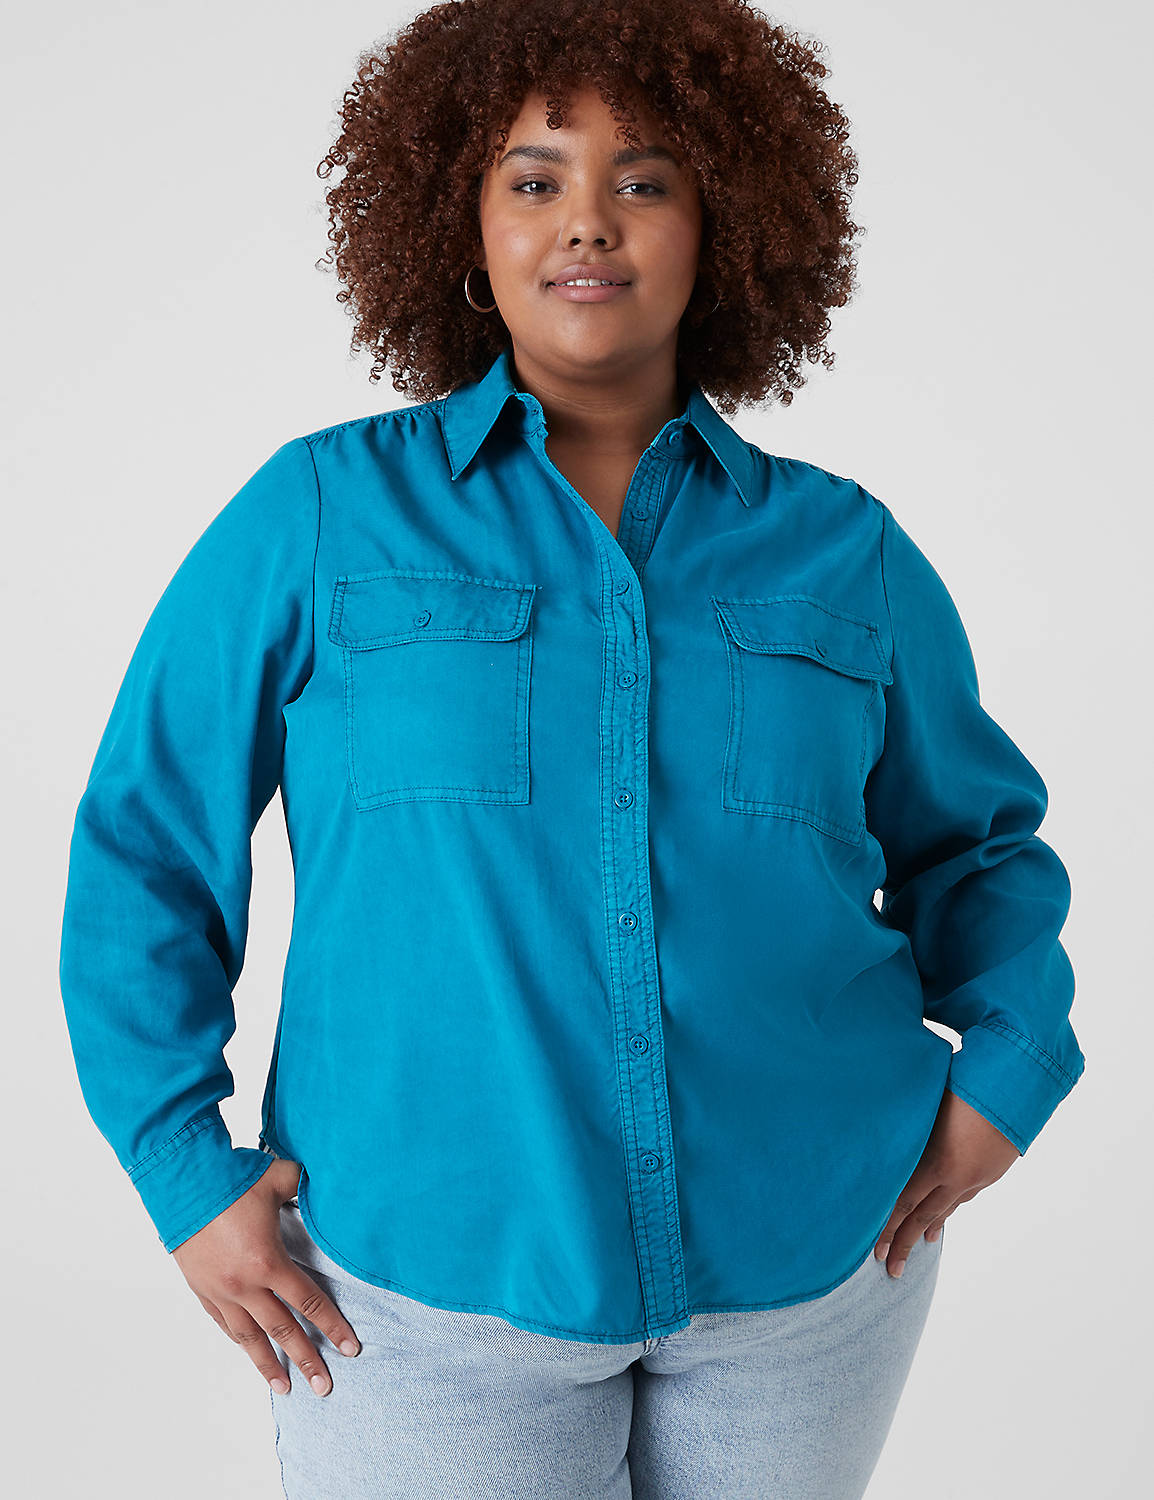 Classic Long Sleeve Collared Button Product Image 1